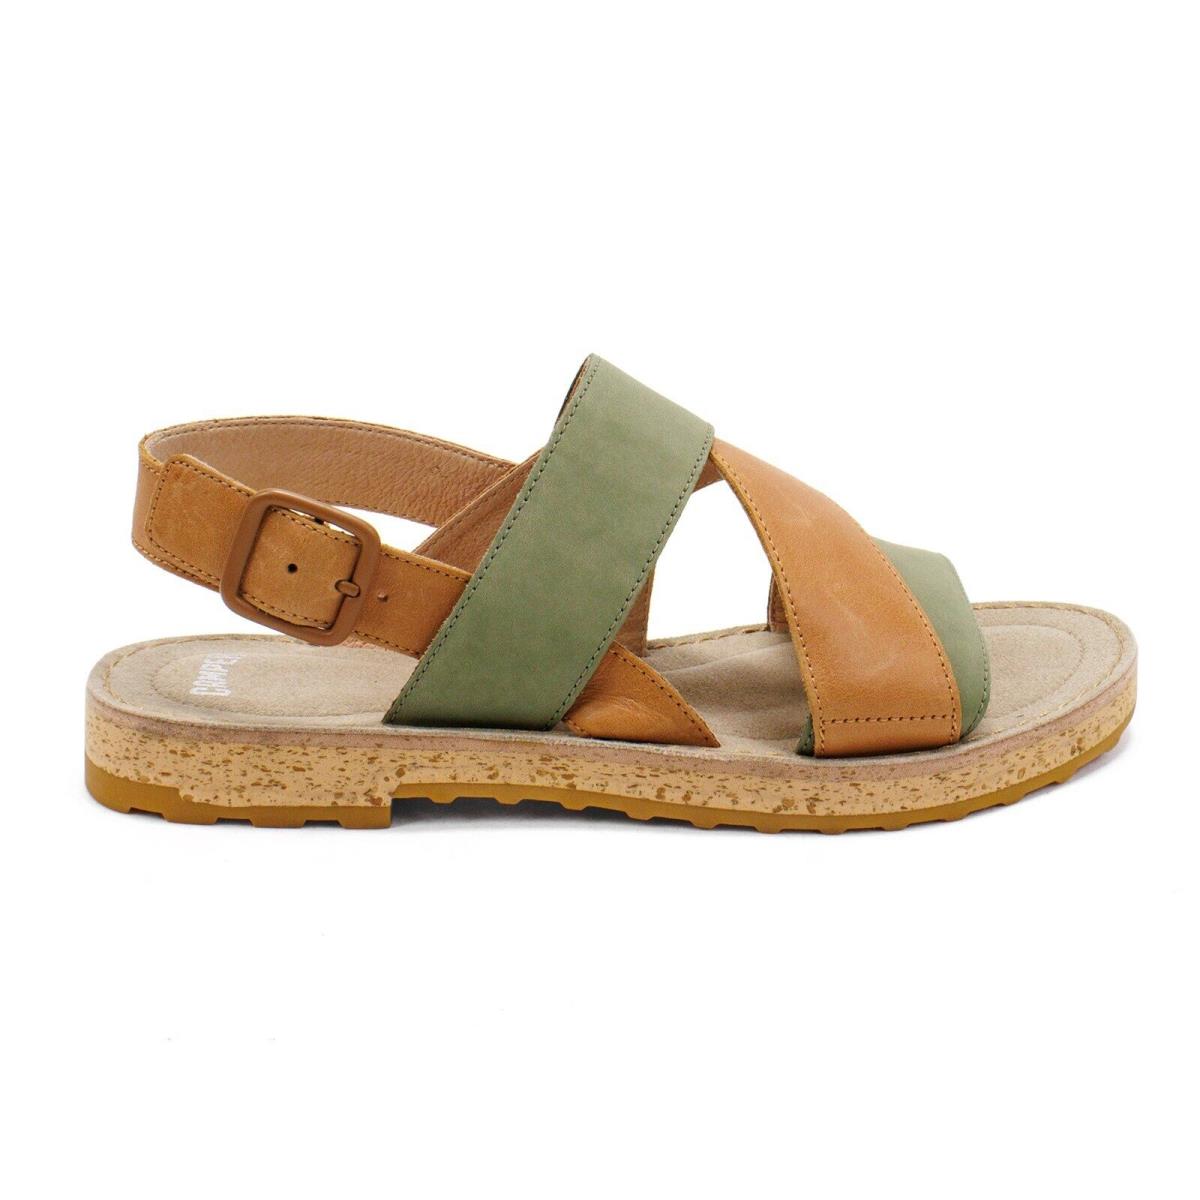 Womens Camper Pimpom Sandals Slingback Two-tone Leather Suede Green